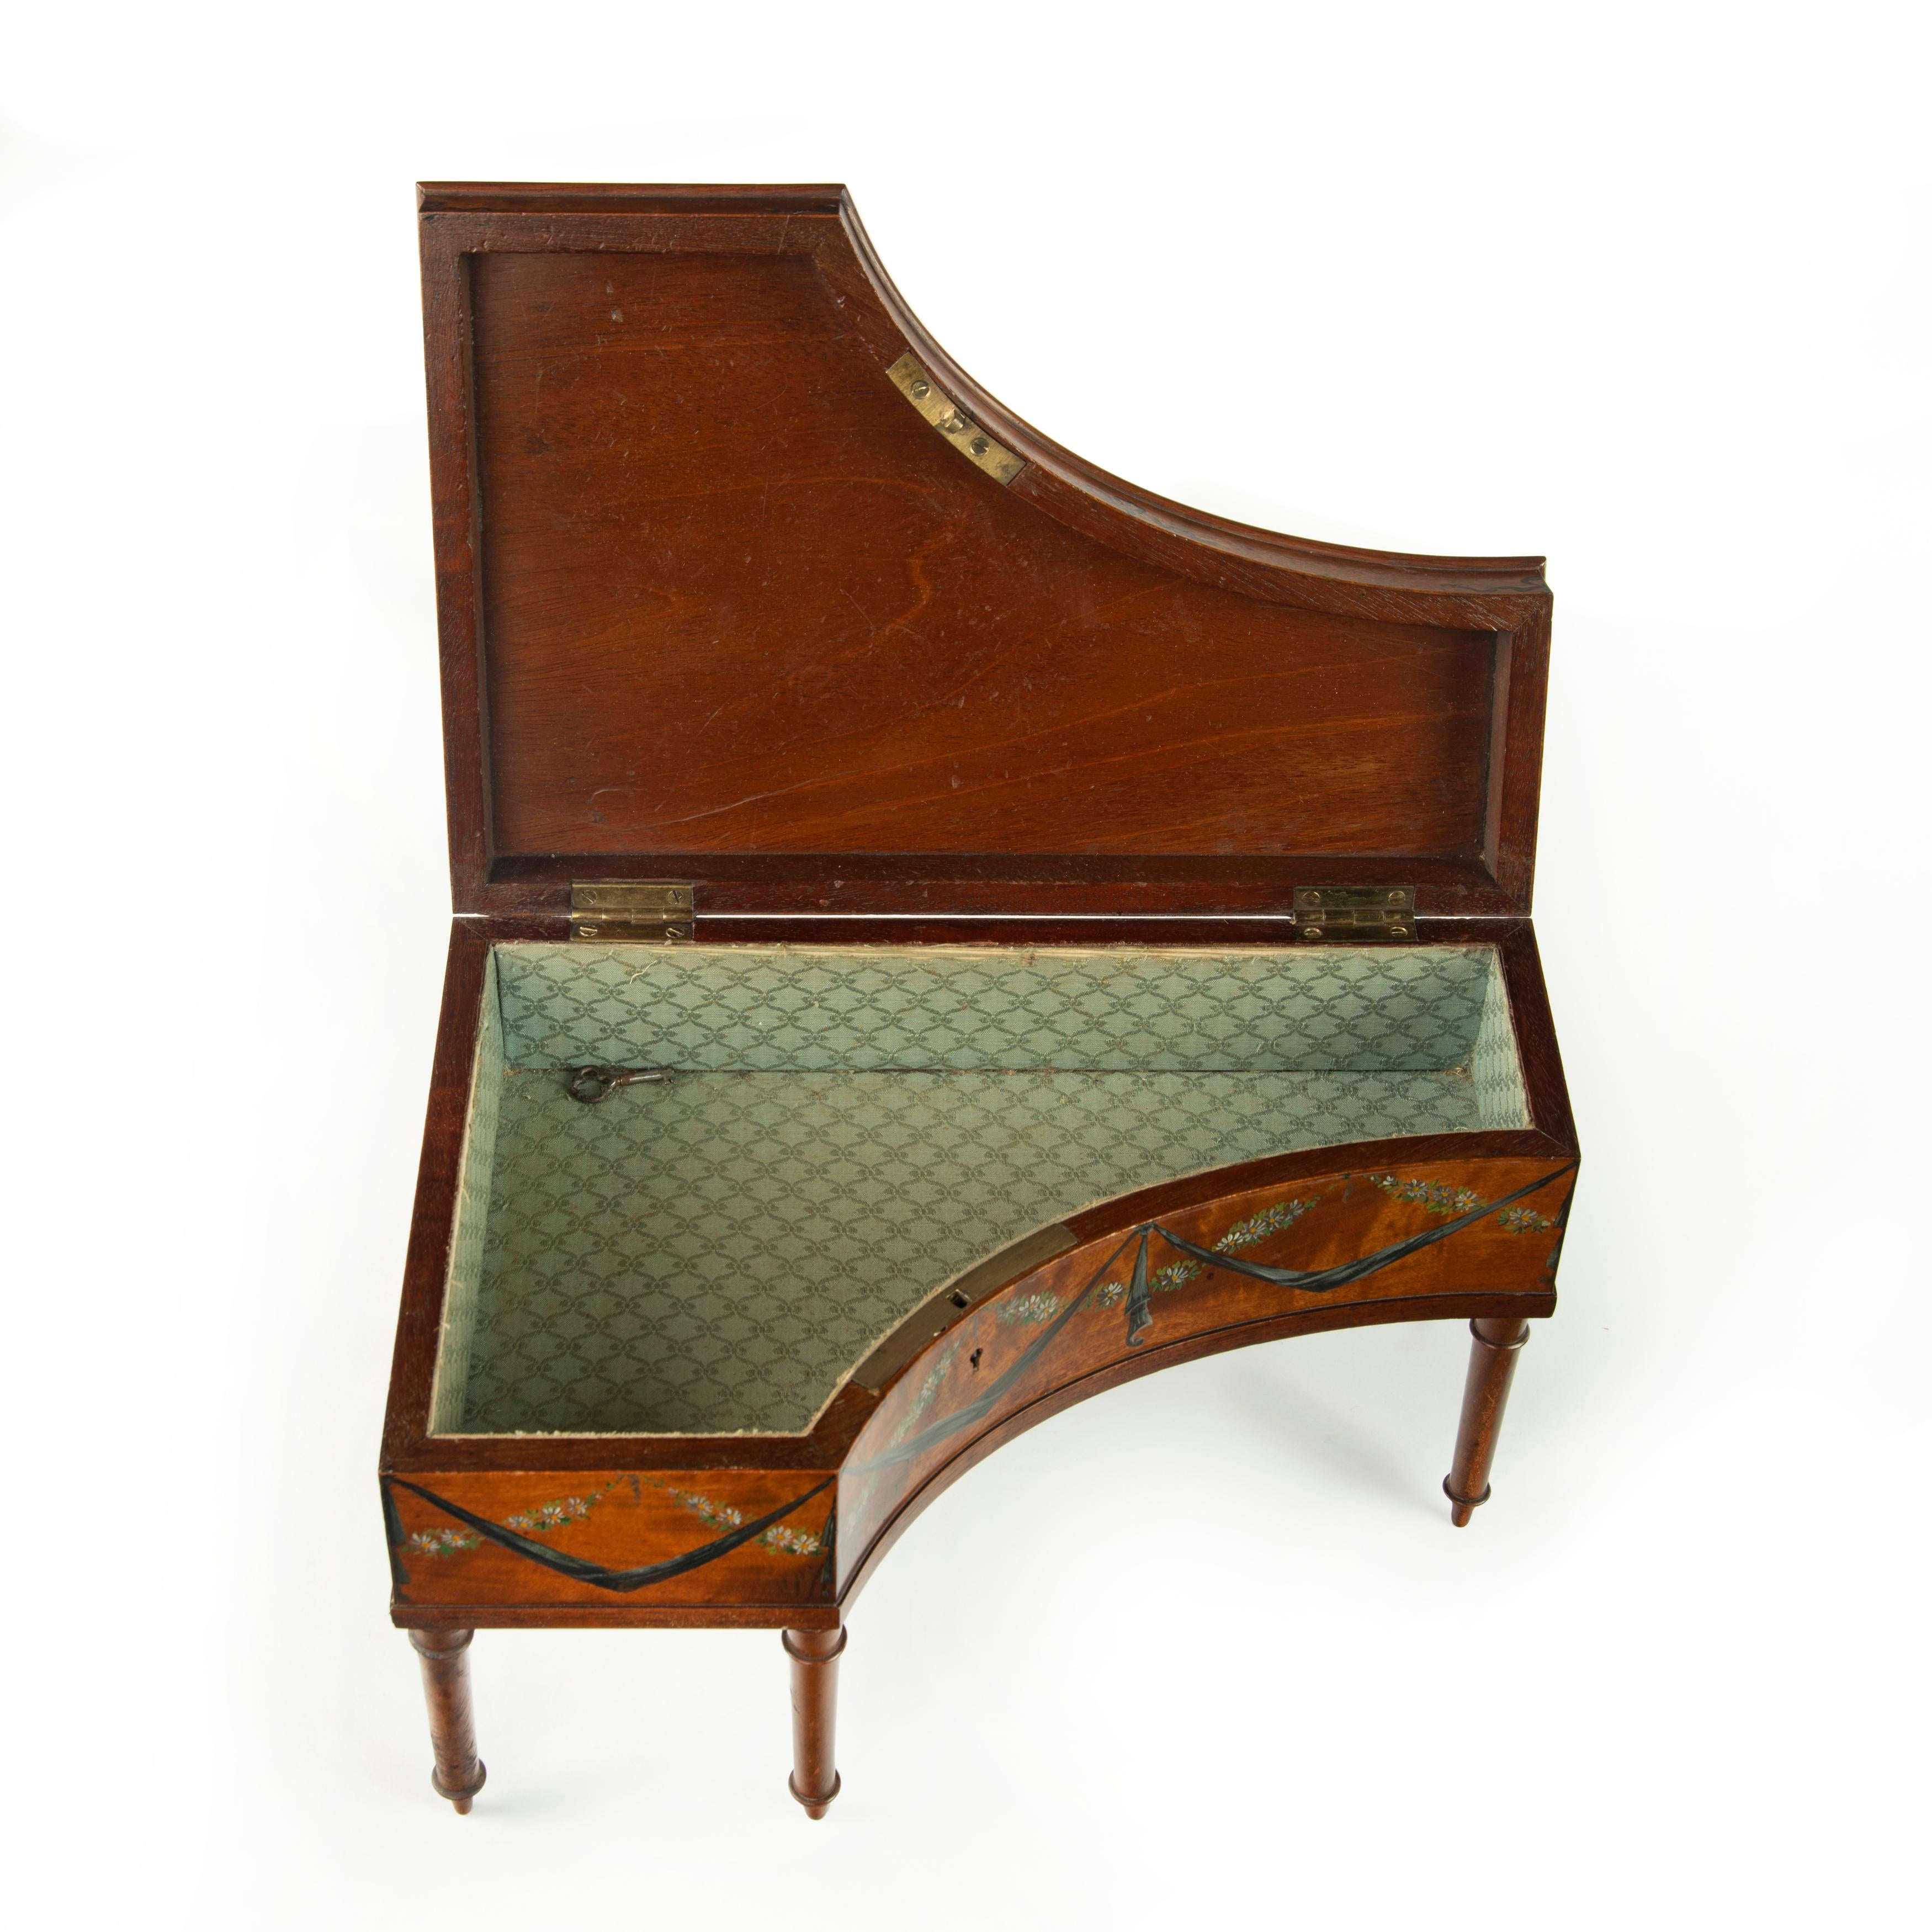 Wood Irish Miniature Satinwood Piano Sewing Box Painted by Herbert Cooper For Sale